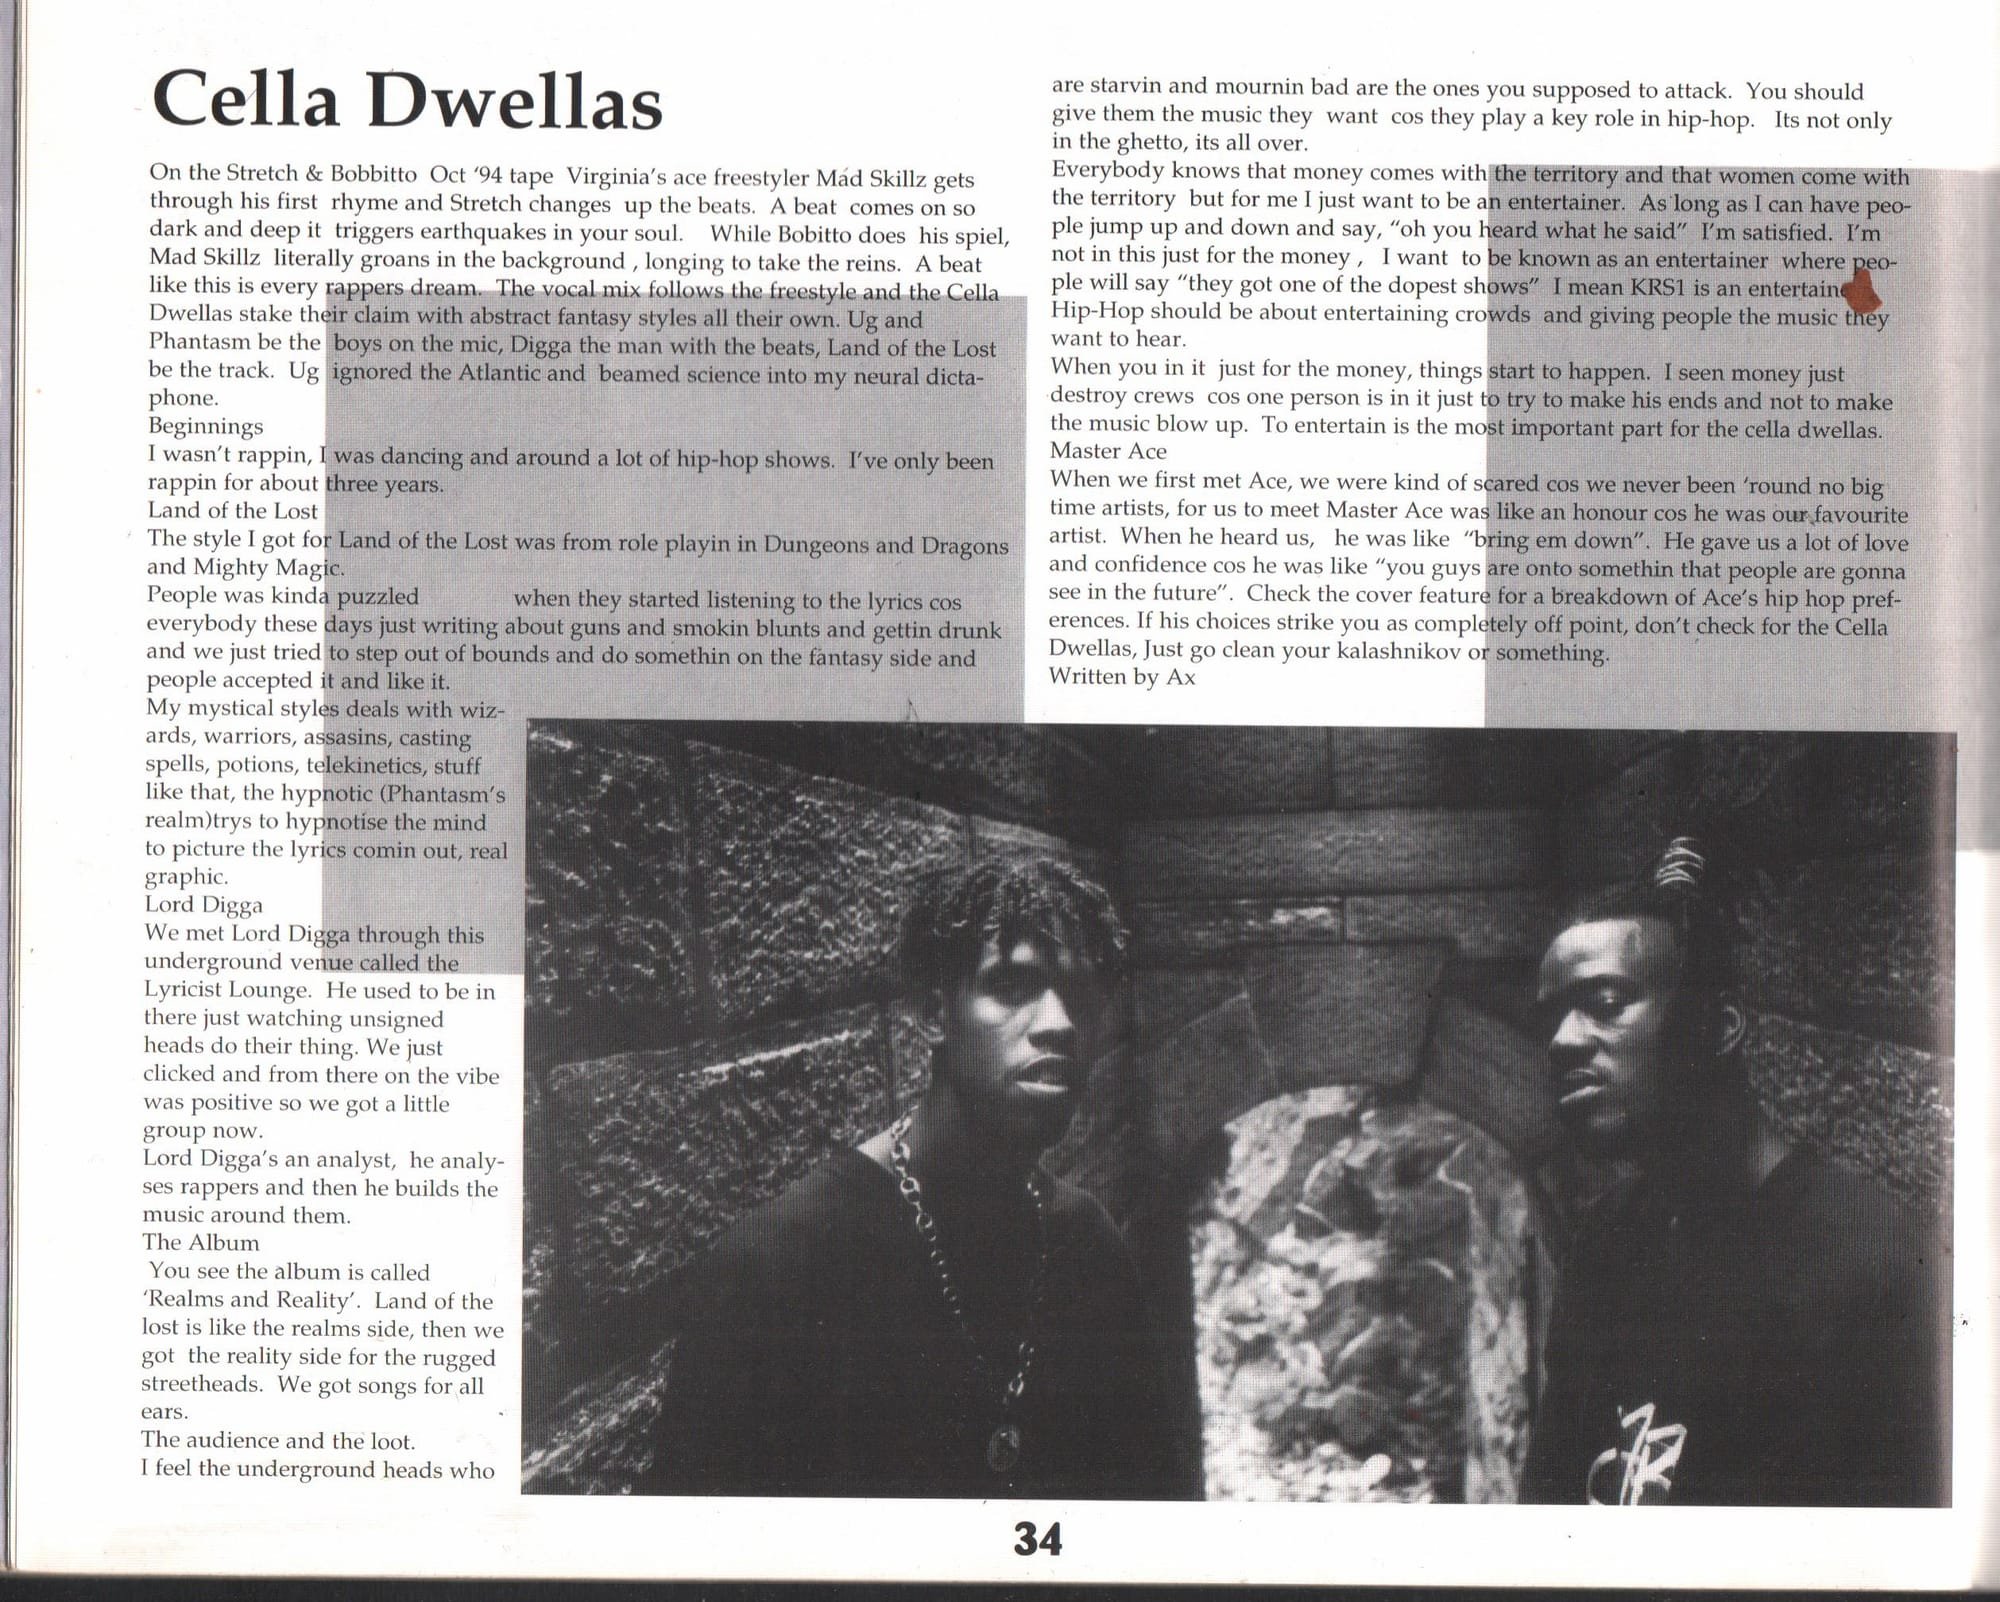 Interview with Ug of Cella Dwellas